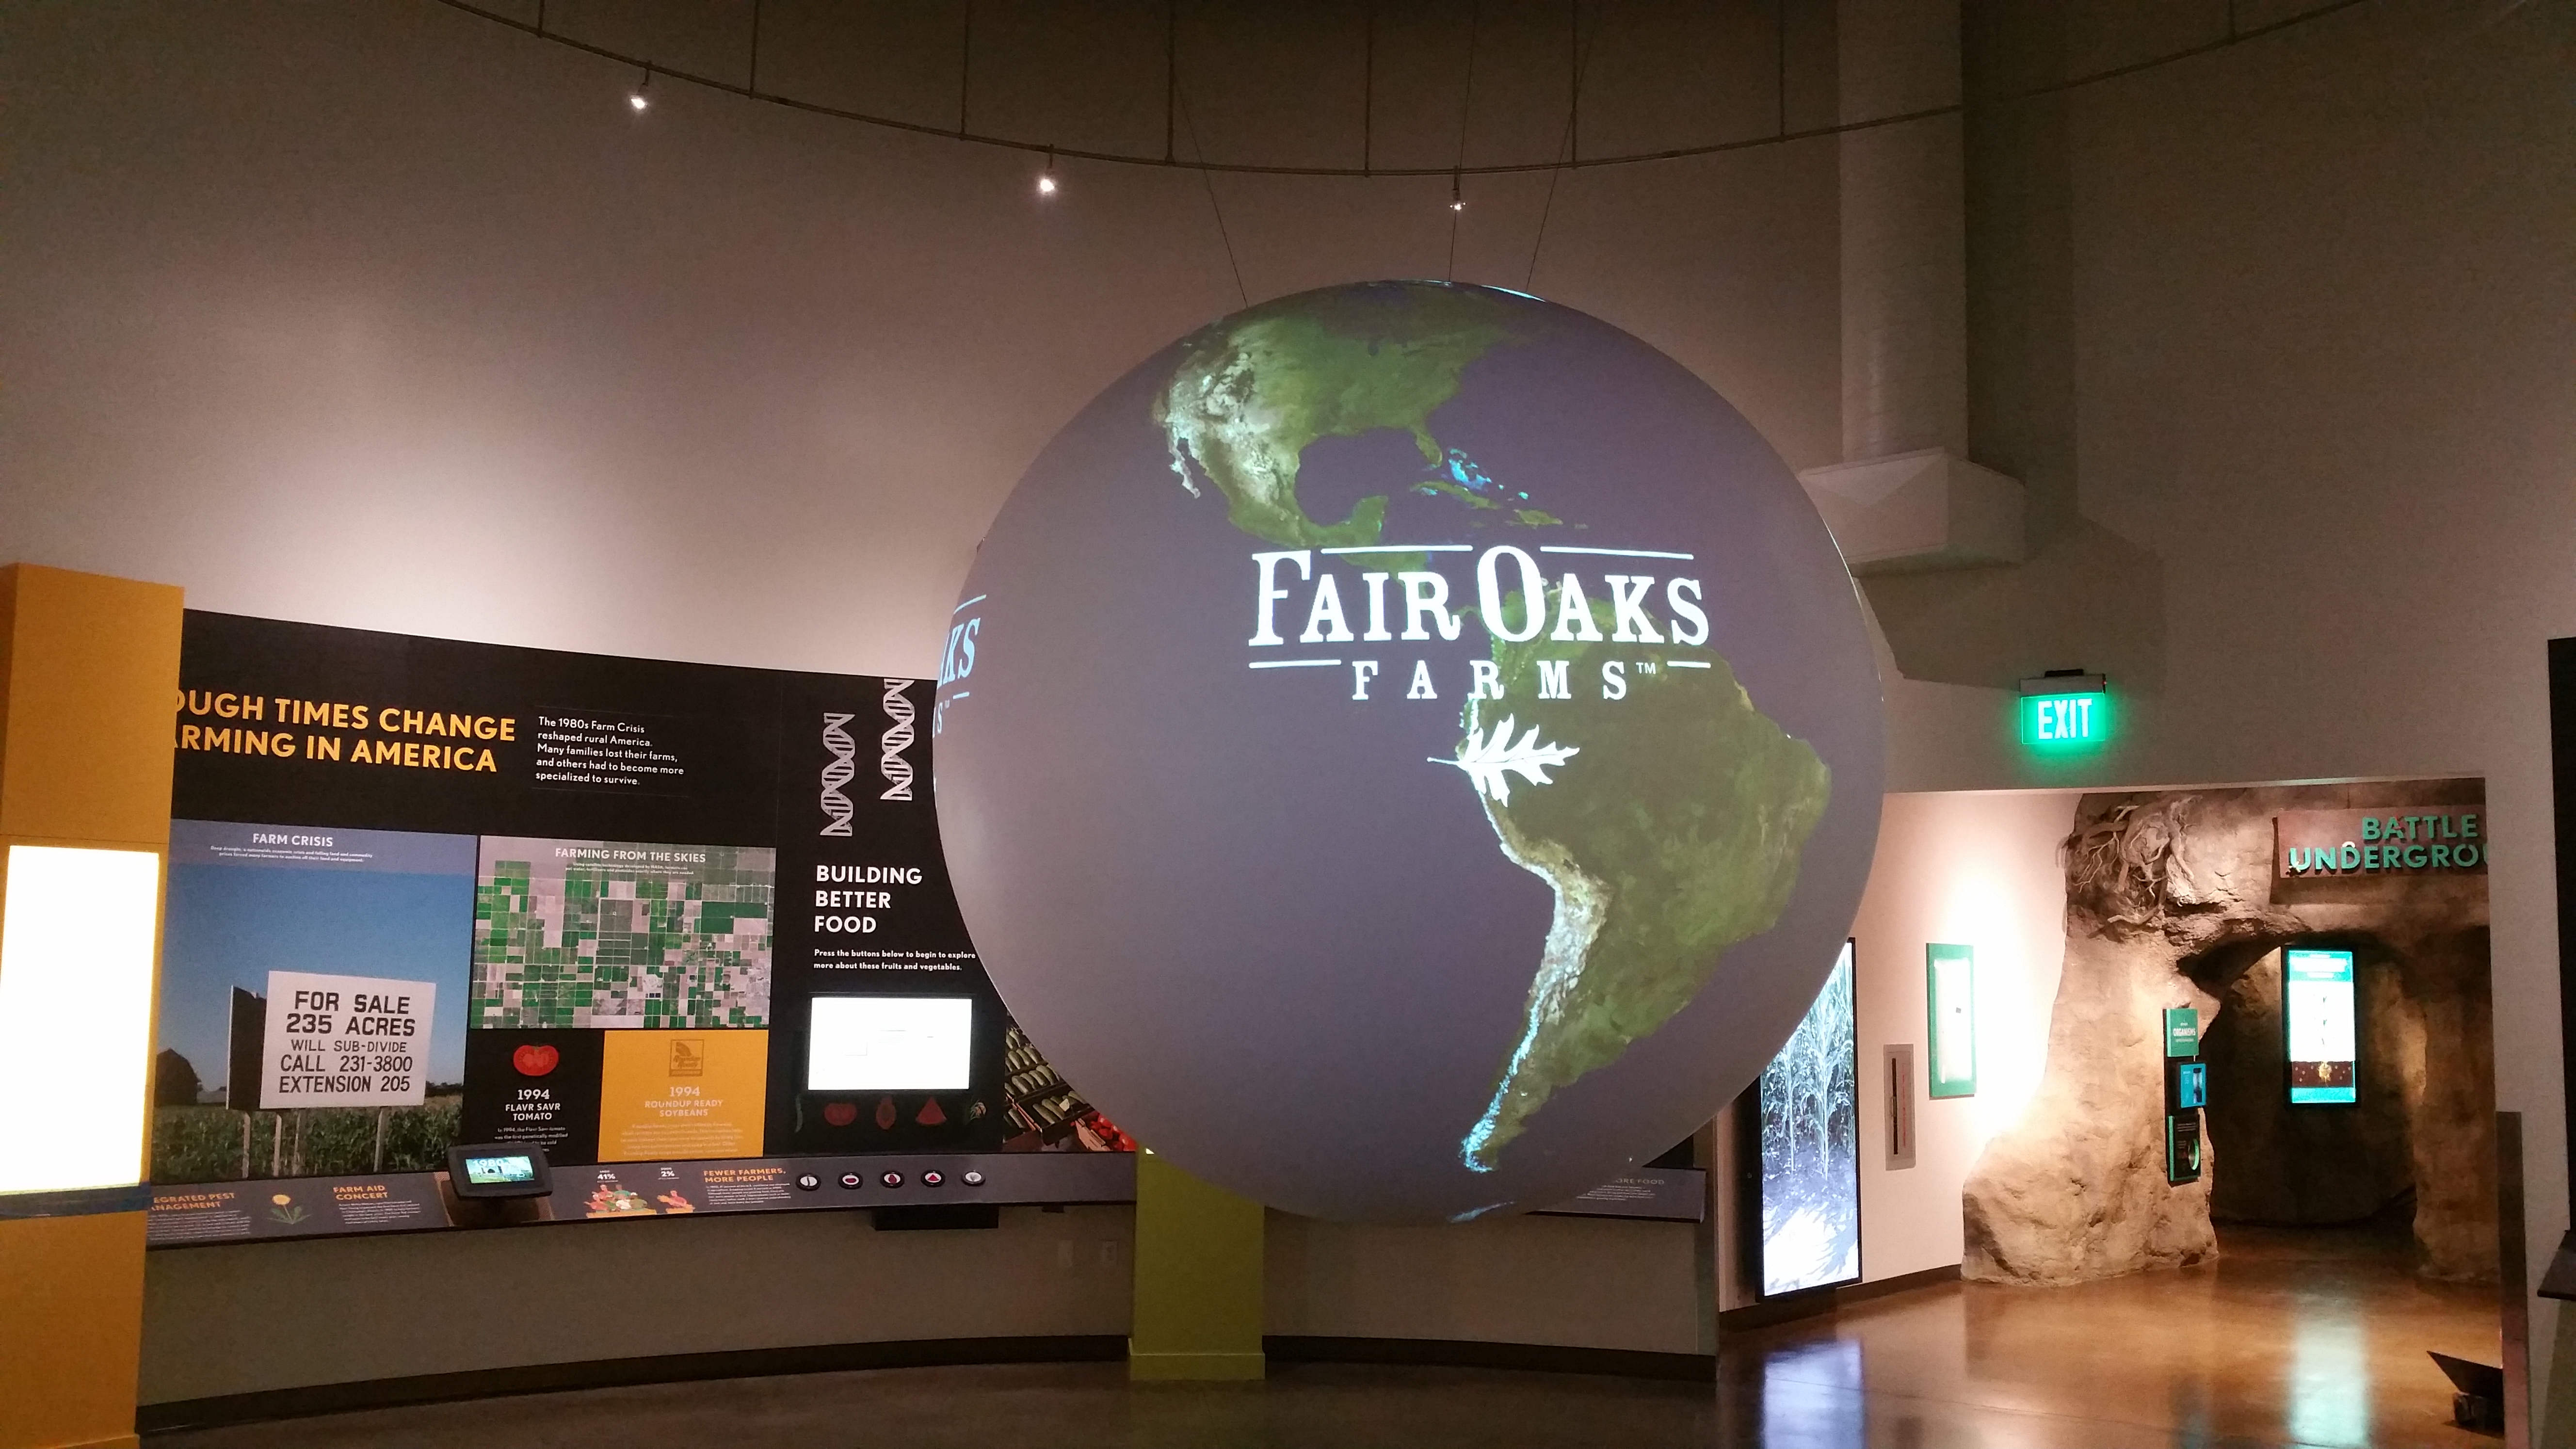 Science On a Sphere displays the Fair Oaks Farm logo over an image of Earth in a well-lit room. Behind it can be seen an exhibit on farming in America